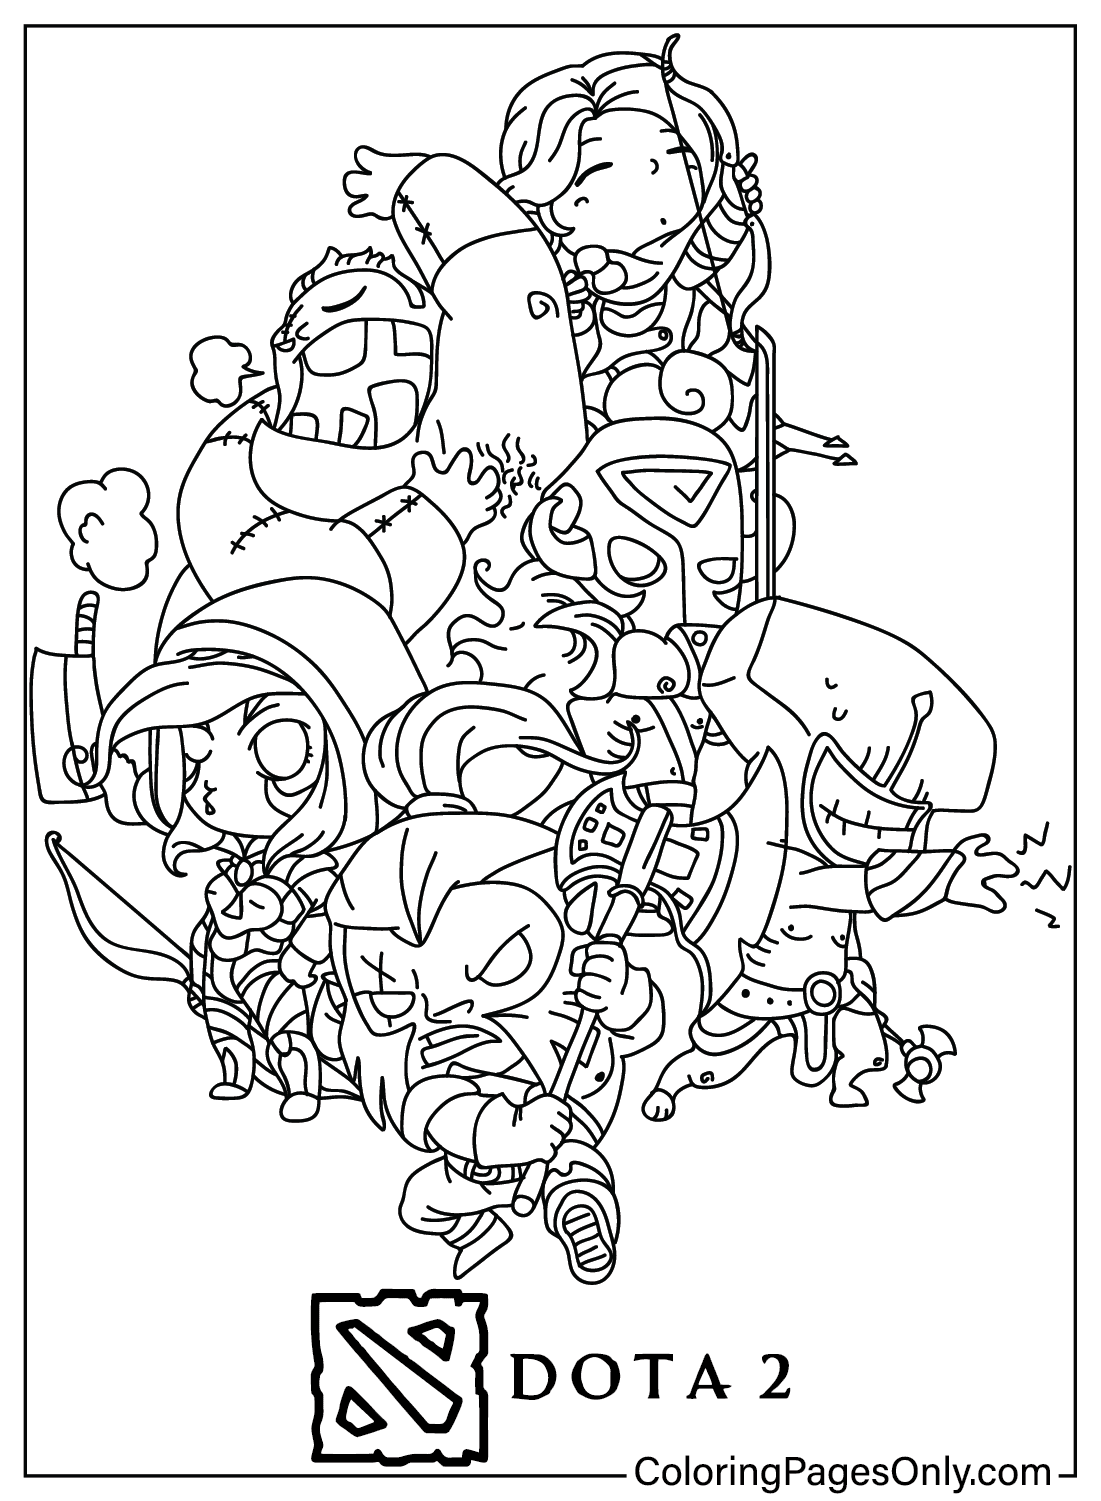 Dota2 Heroes Coloring Page from Dota 2